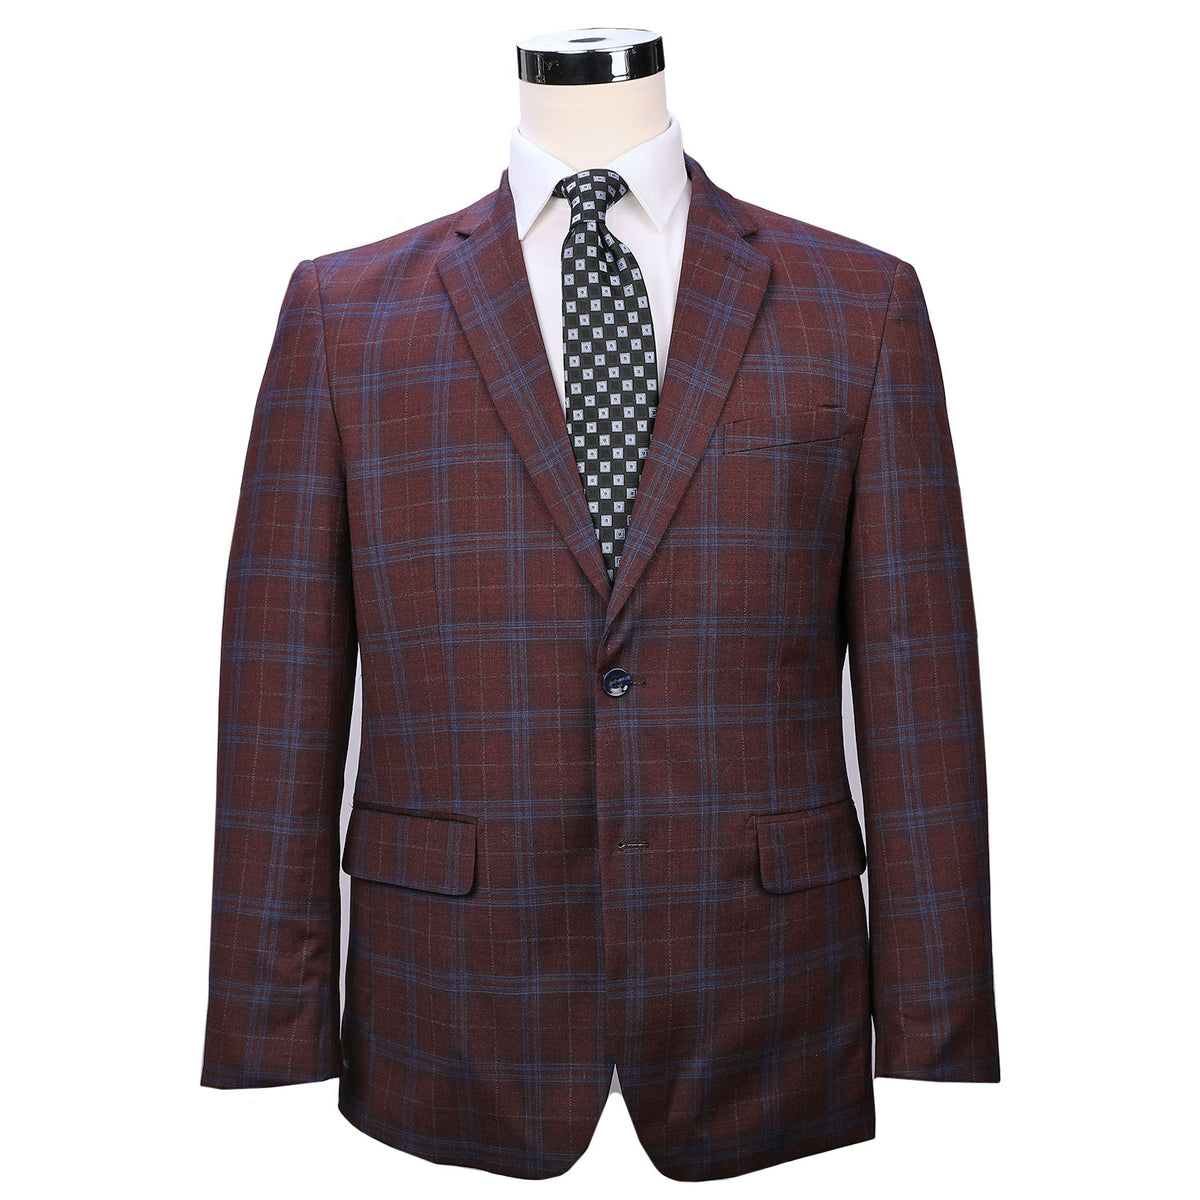 A showstopper for a showstopper! Each Roffe Red Plaid Sport Coat is lovingly made of deluxe wool for year-round finesse and style. 